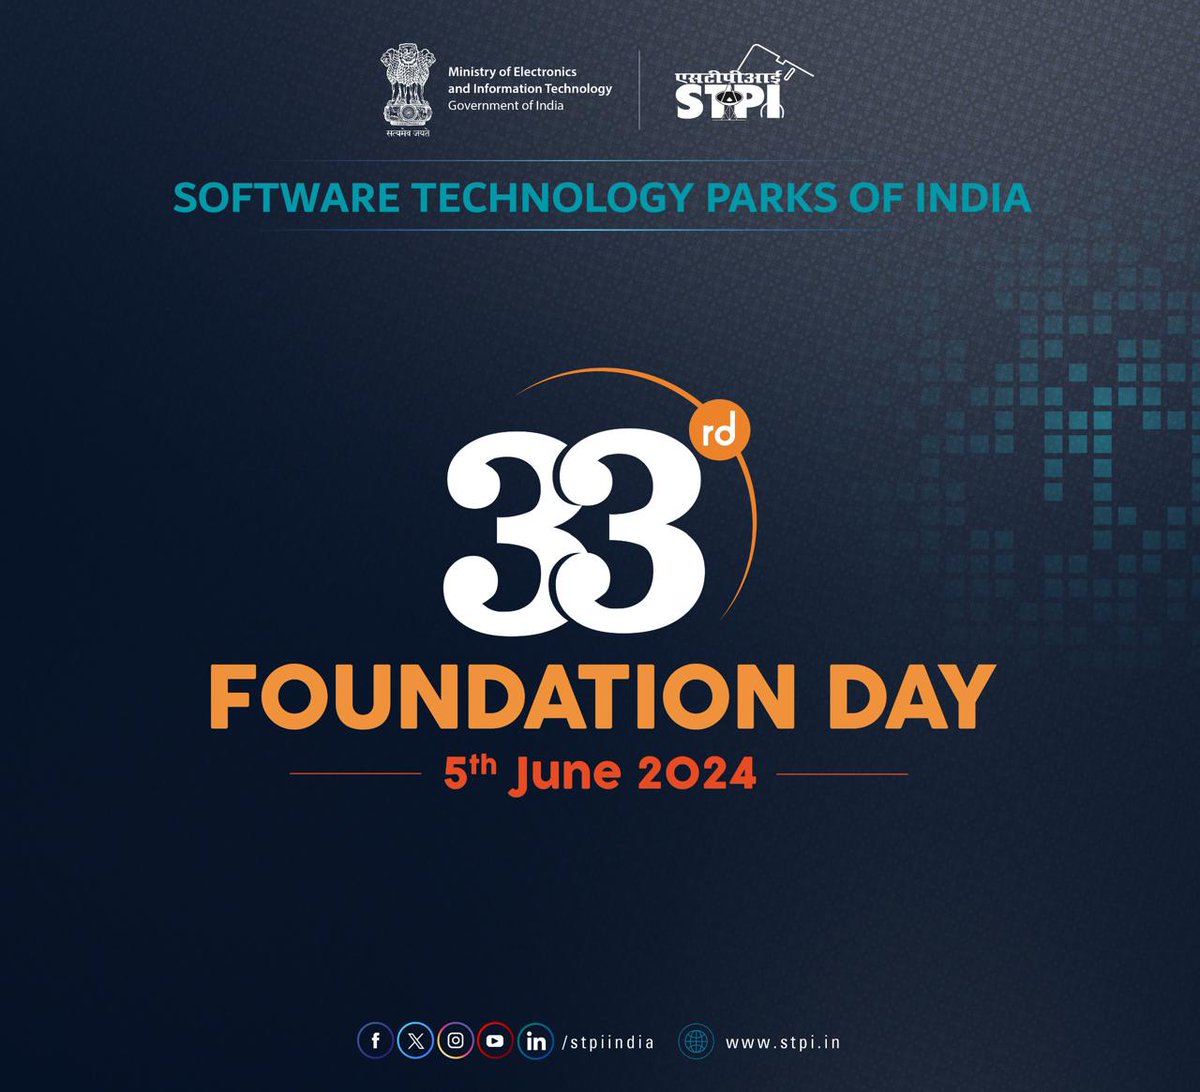 STPI is organising a seminar on 'Positioning Bharat as a Tech Product Nation' on the occasion of its 33rd Foundation Day.  
🗓 5th June 2024
🕤 9:30 am
🔴Watch Live: bit.ly/stpi-at-33
#STPI33Years